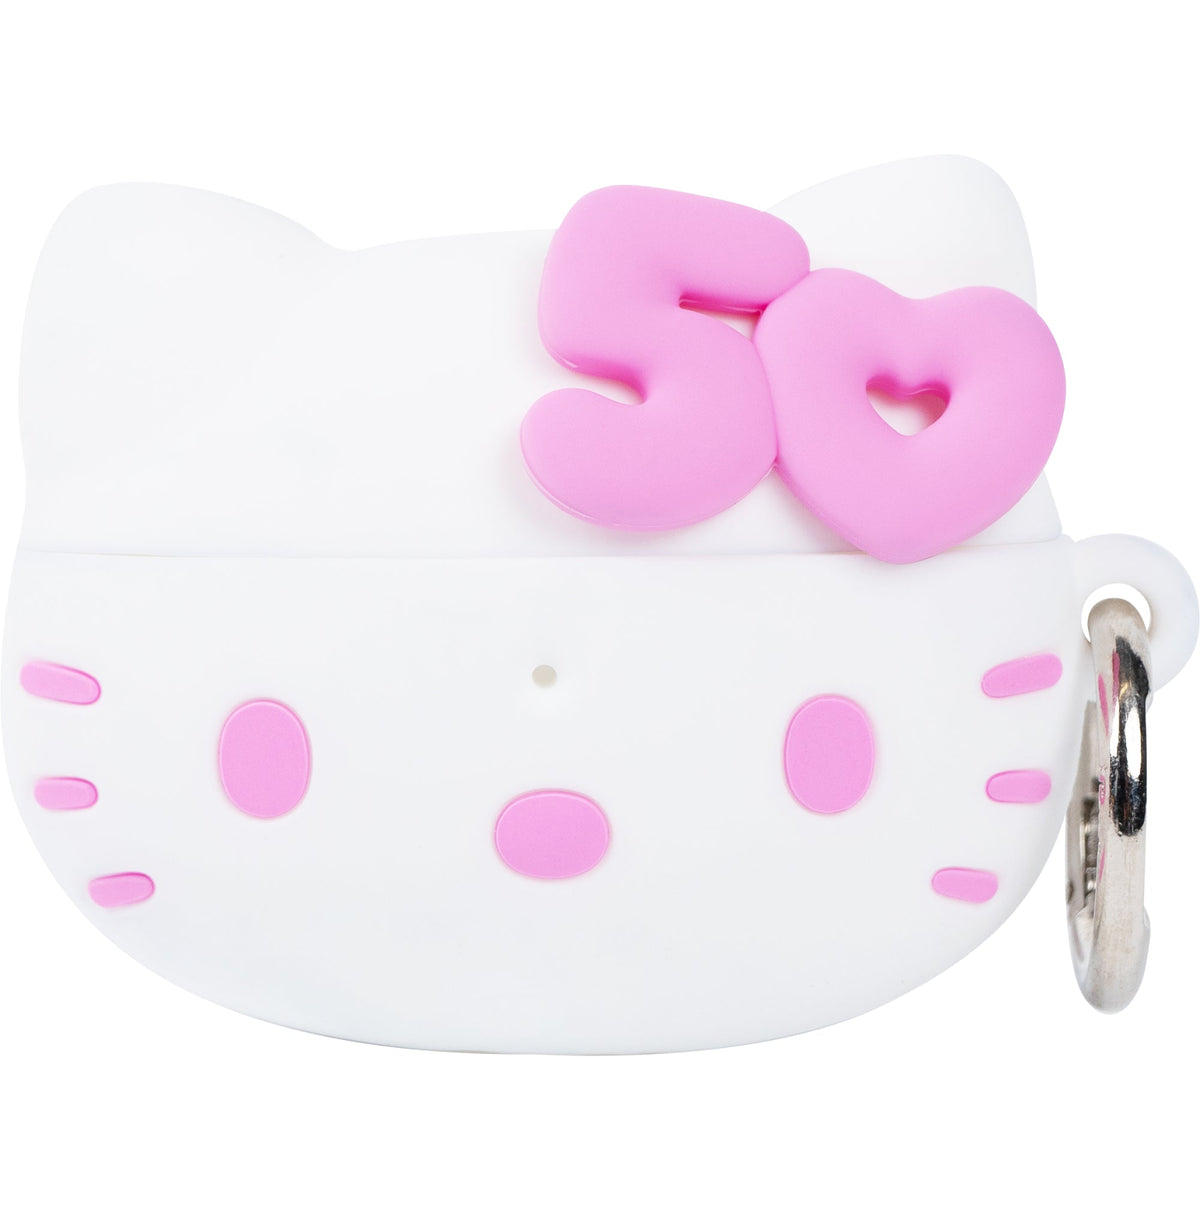 Hello Kitty 50th Anniversary AirPods Case AirPods Case Hamee.com - Hamee US   